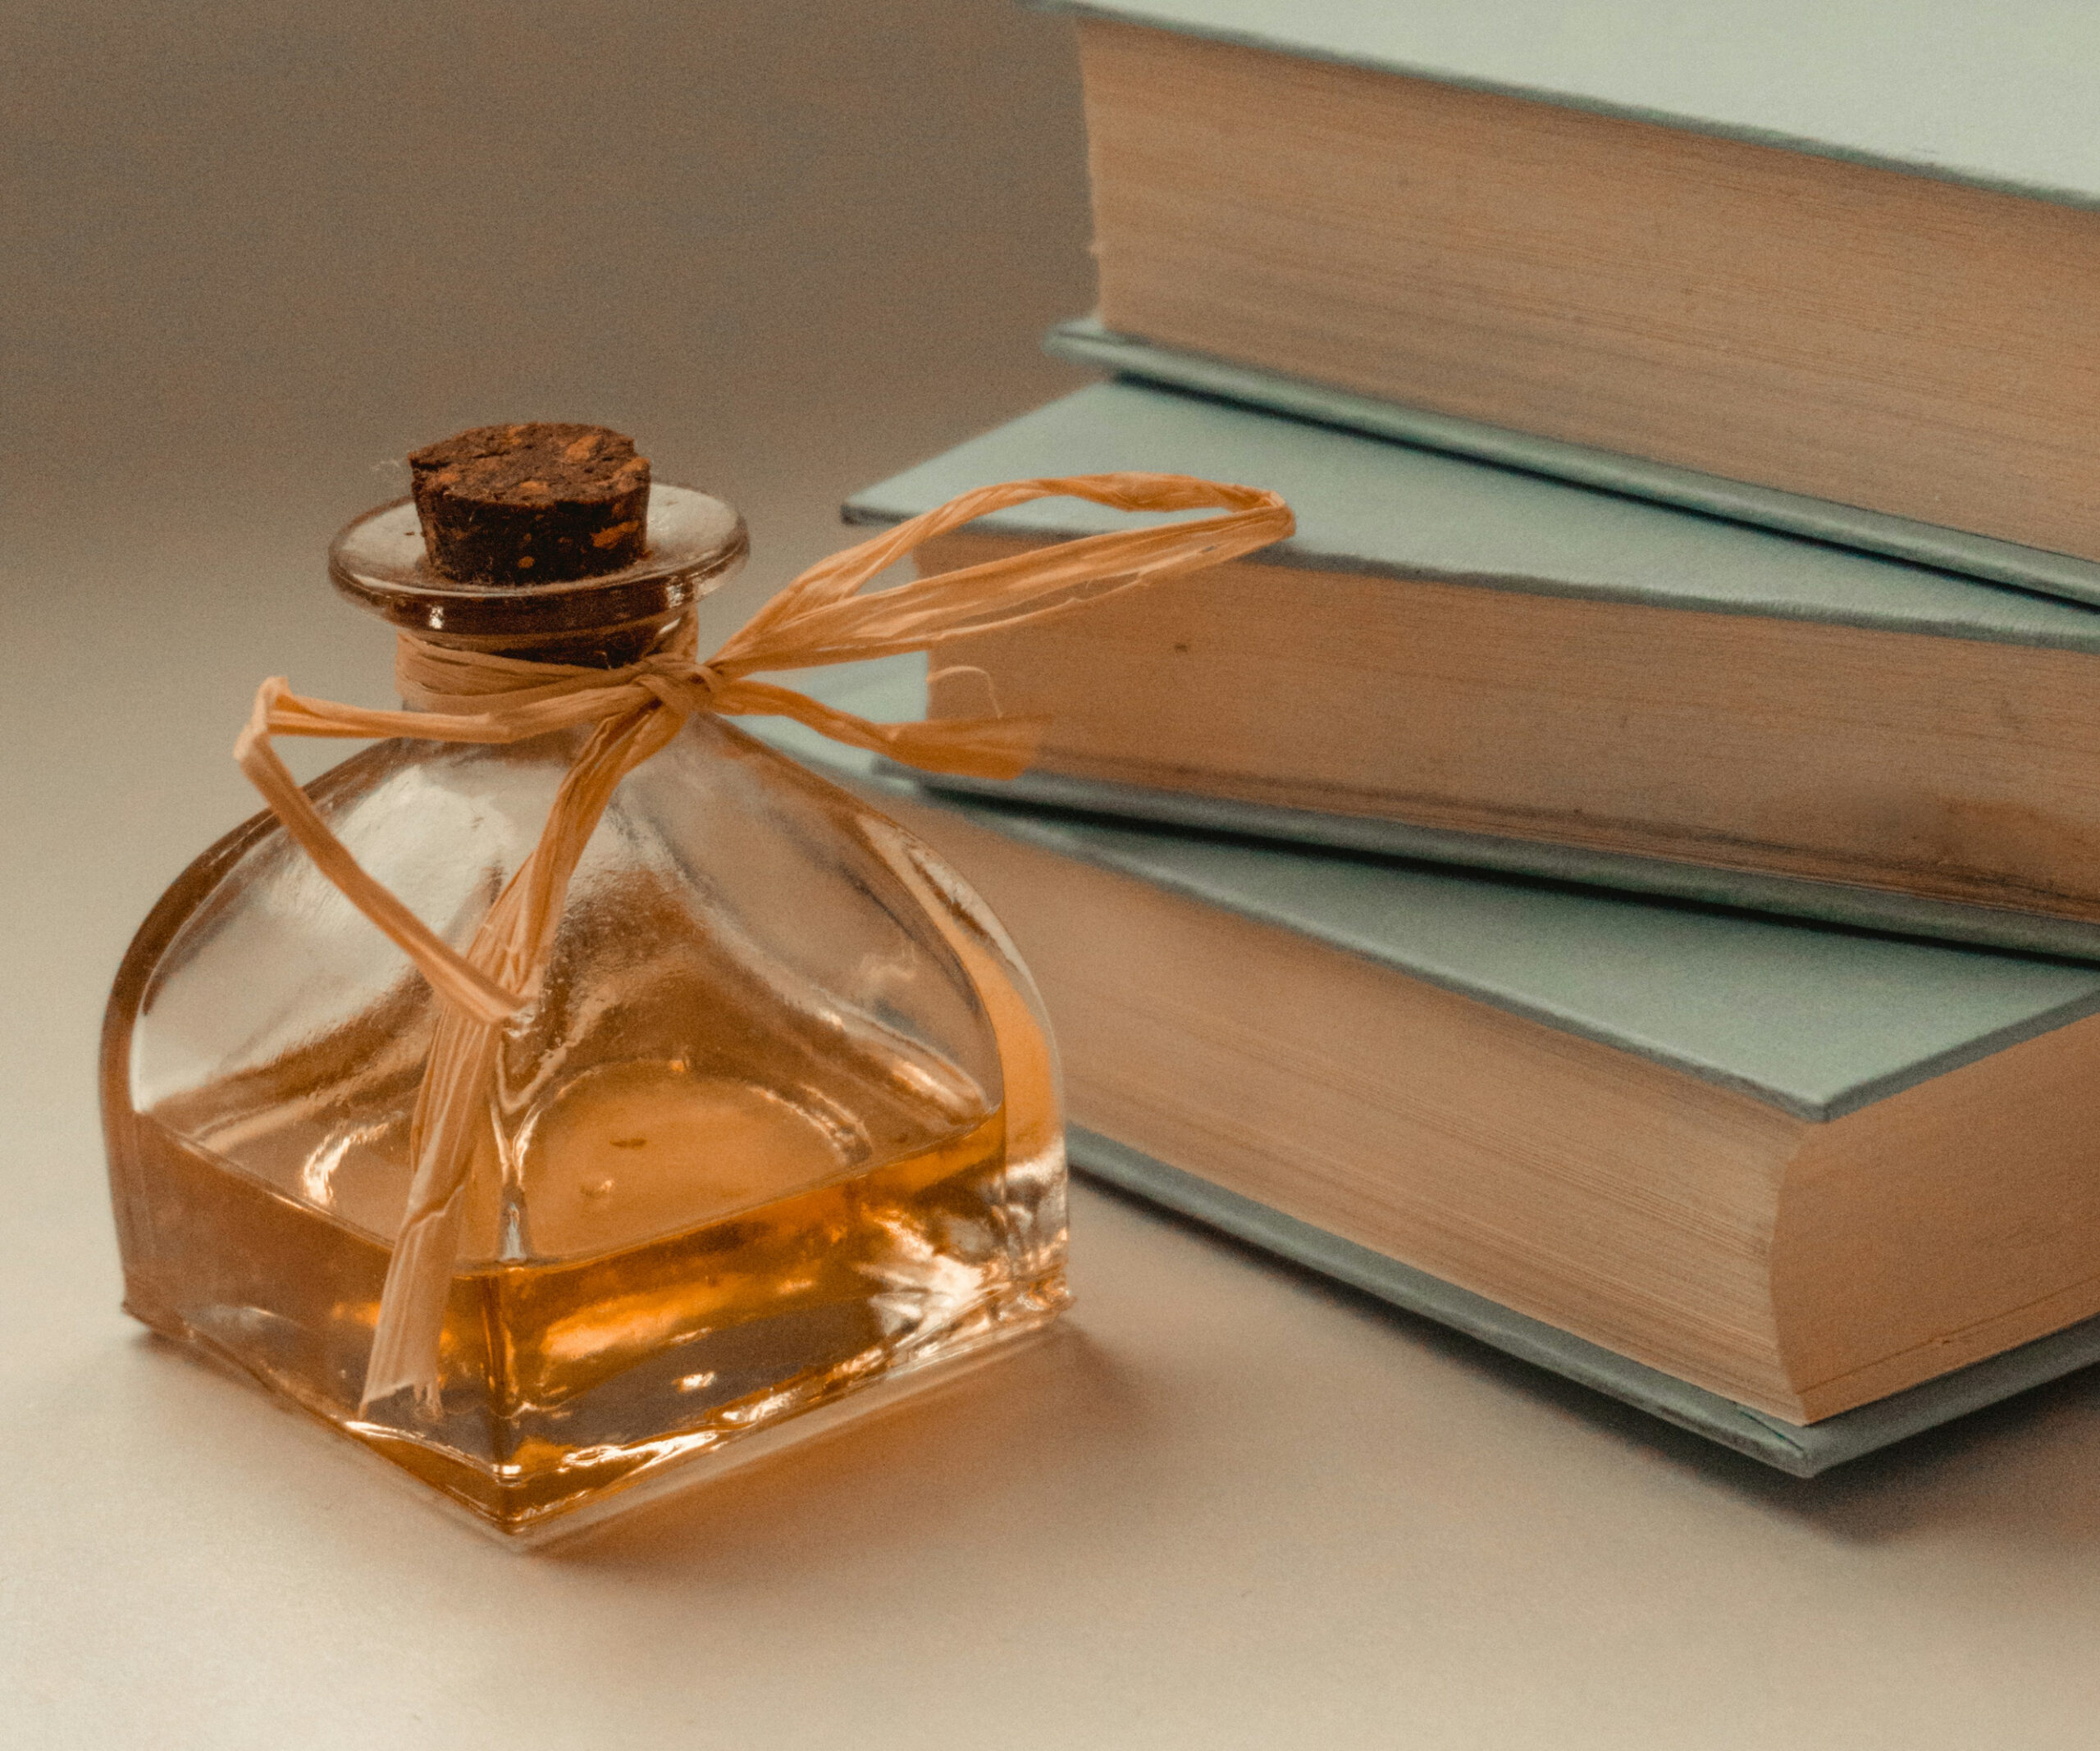 Scent of Sophistication: Top 6 Perfumes for the Modern Woman